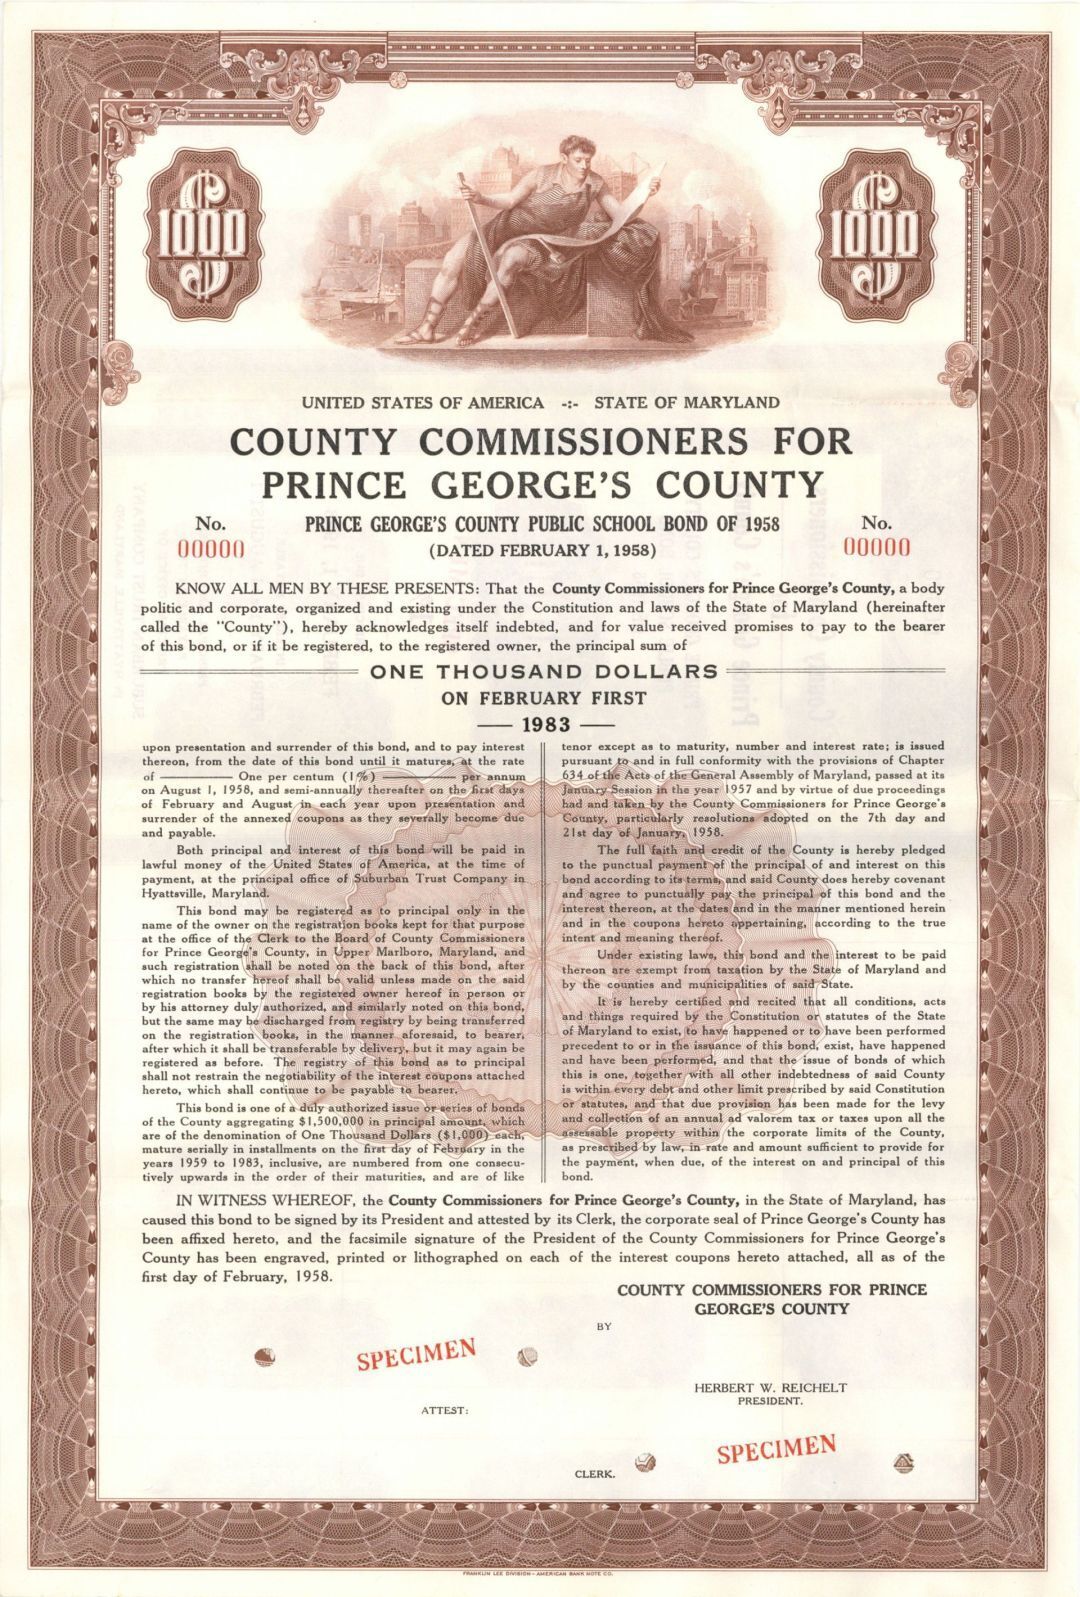 County Commissioners For Prince George\'s County - $1,000 Specimen Bond - Specime